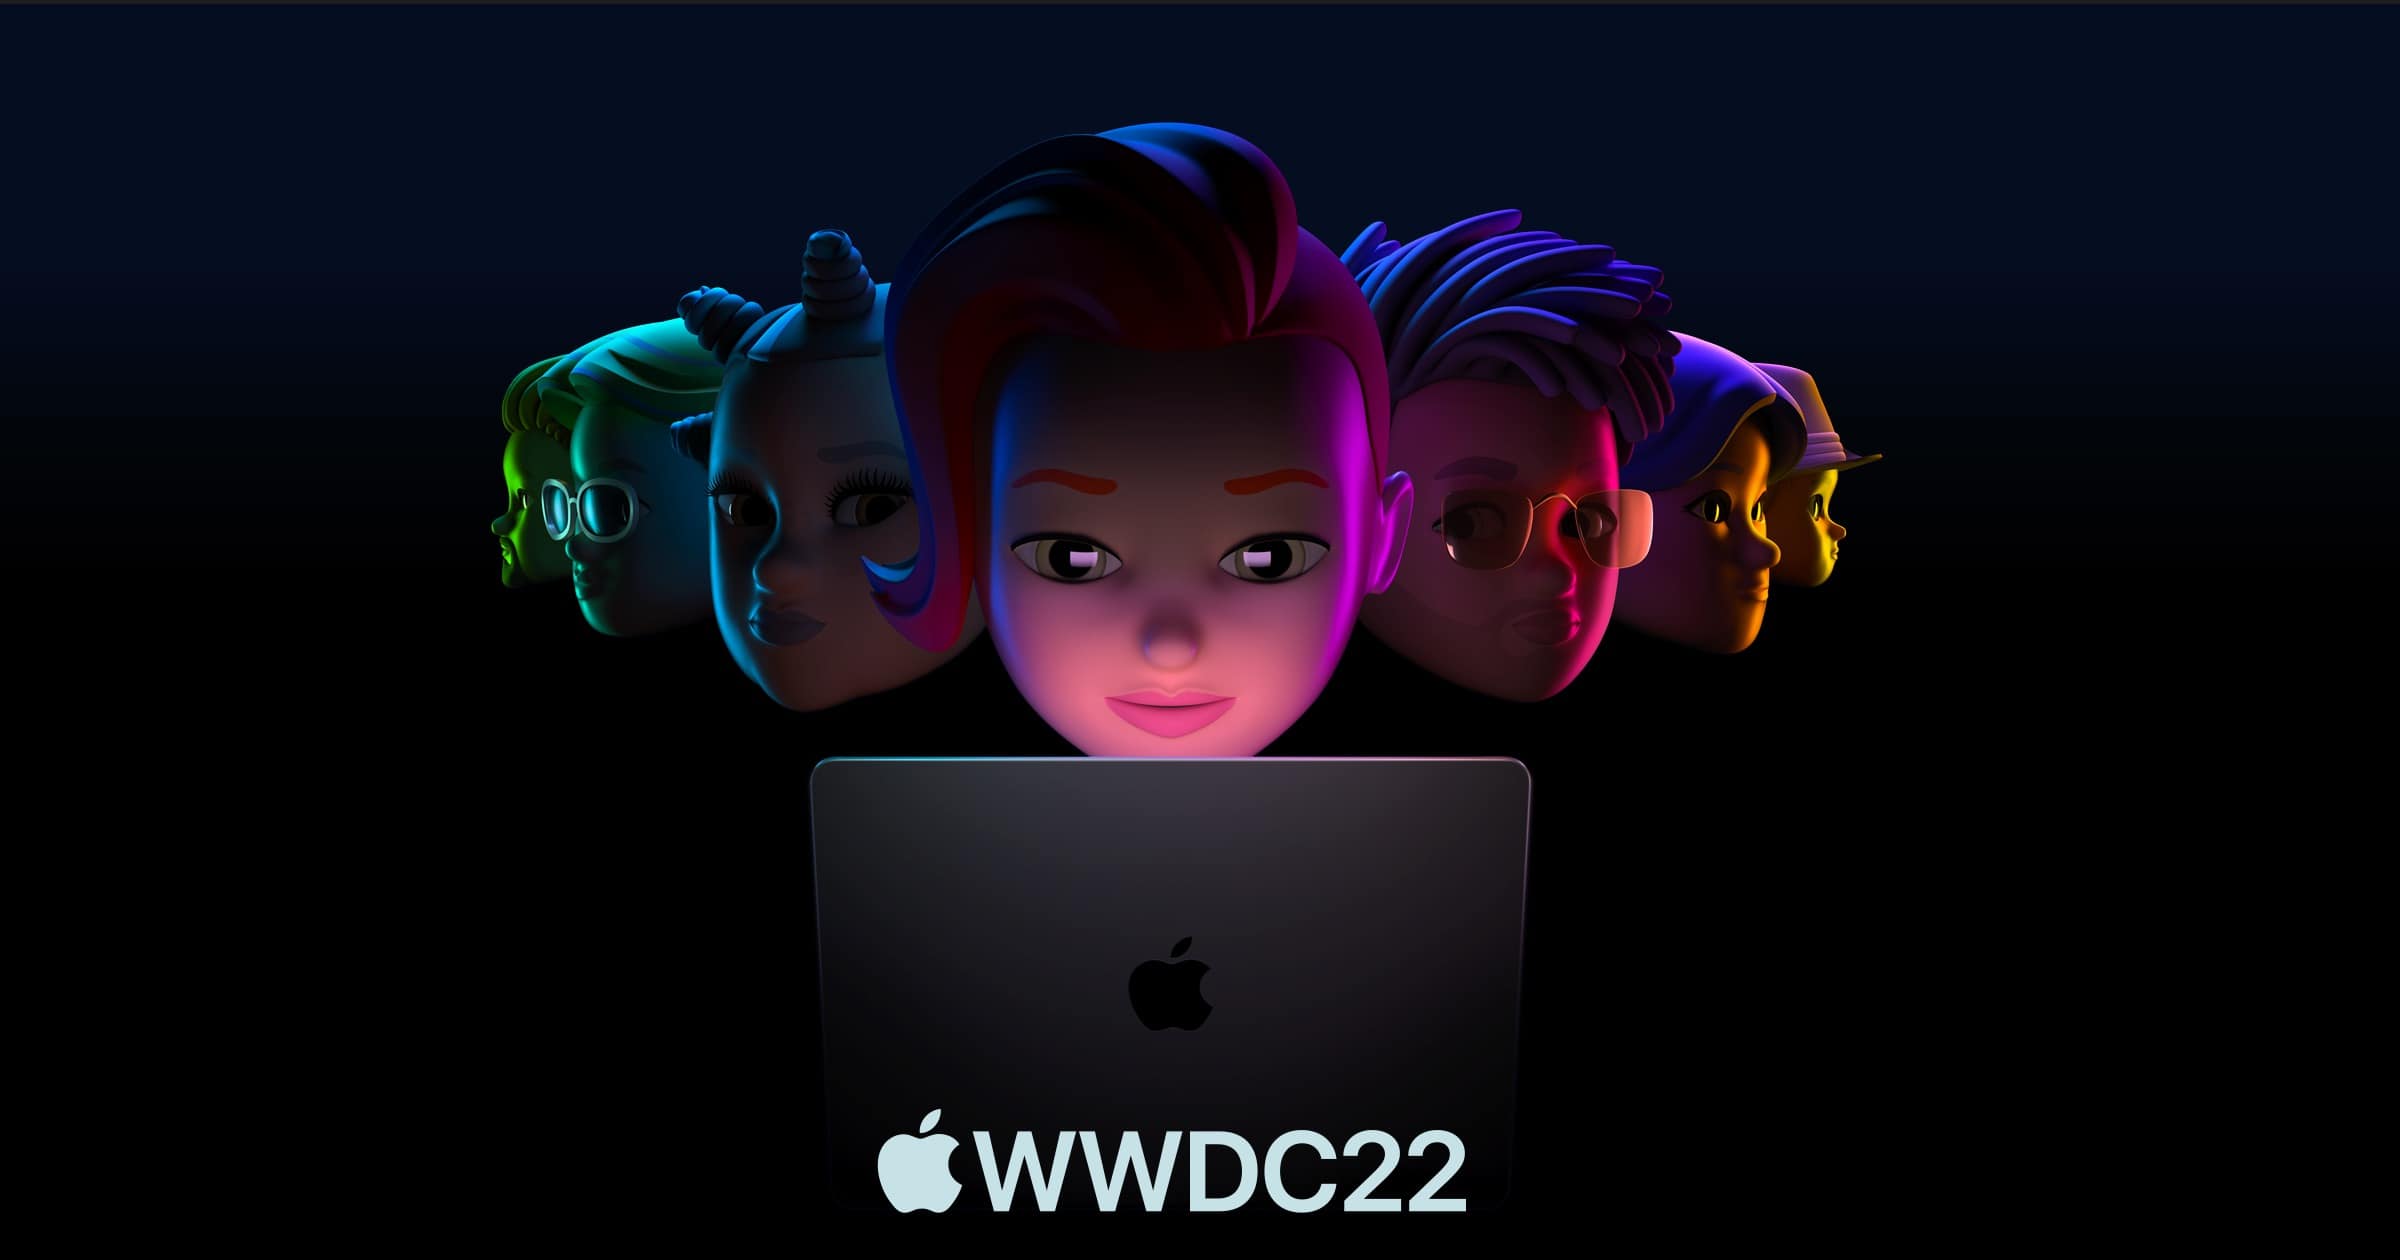 How to Tune Into the WWDC 2022 Keynote on June 6